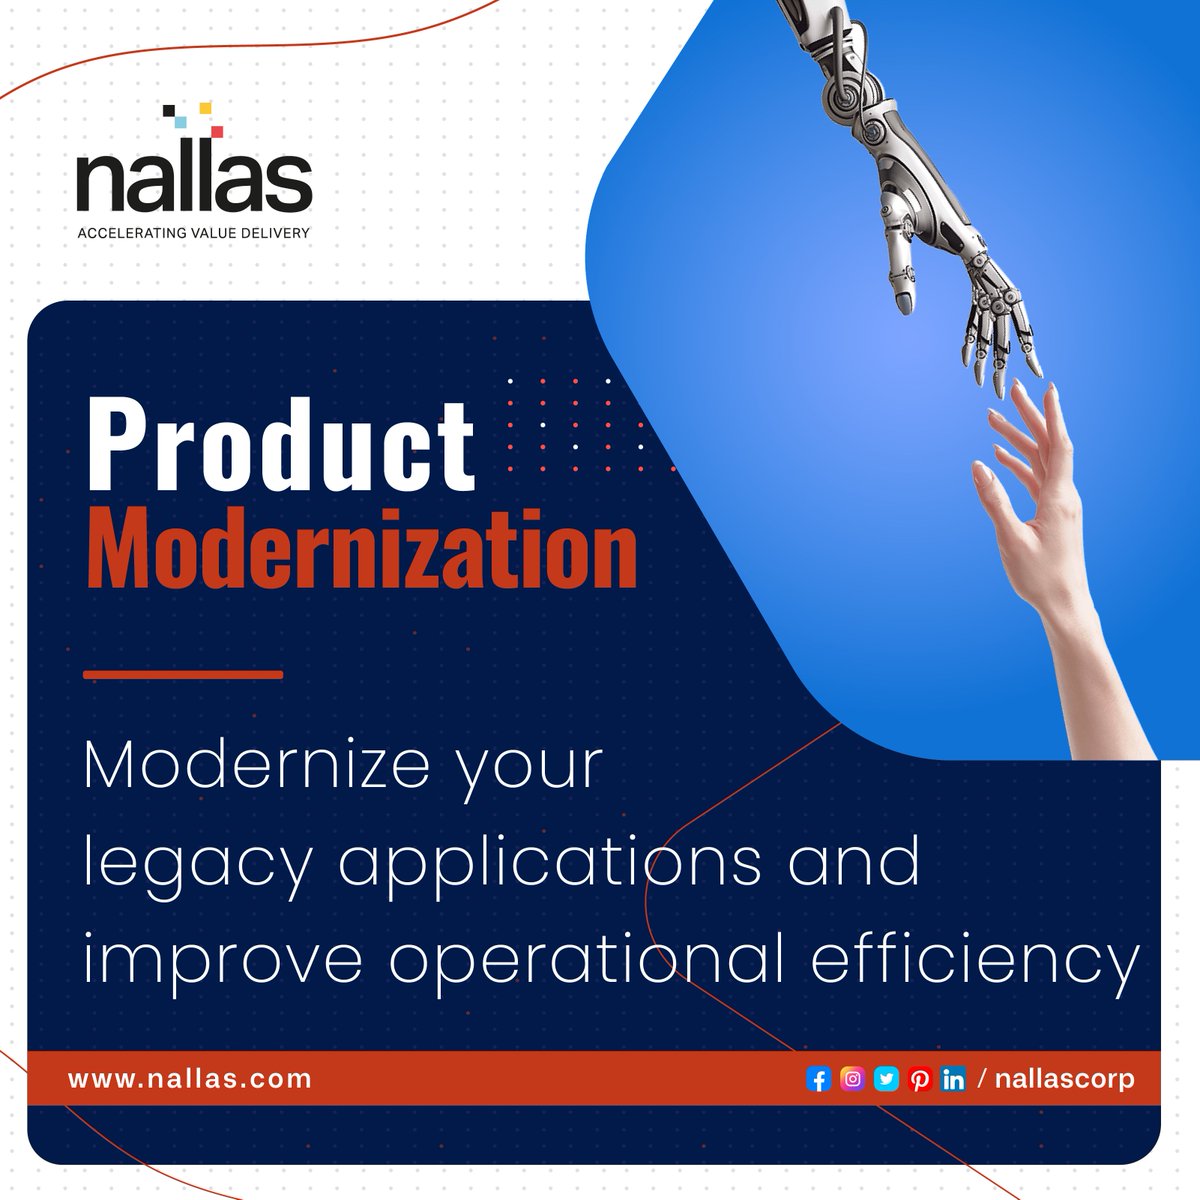 It is crucial to modernize your legacy systems as technology innovations offer new business and cost-cutting opportunities.

To know more nallas.com/product-engine…

#productmodernization #productmodernizationservices #productengineering #nallas